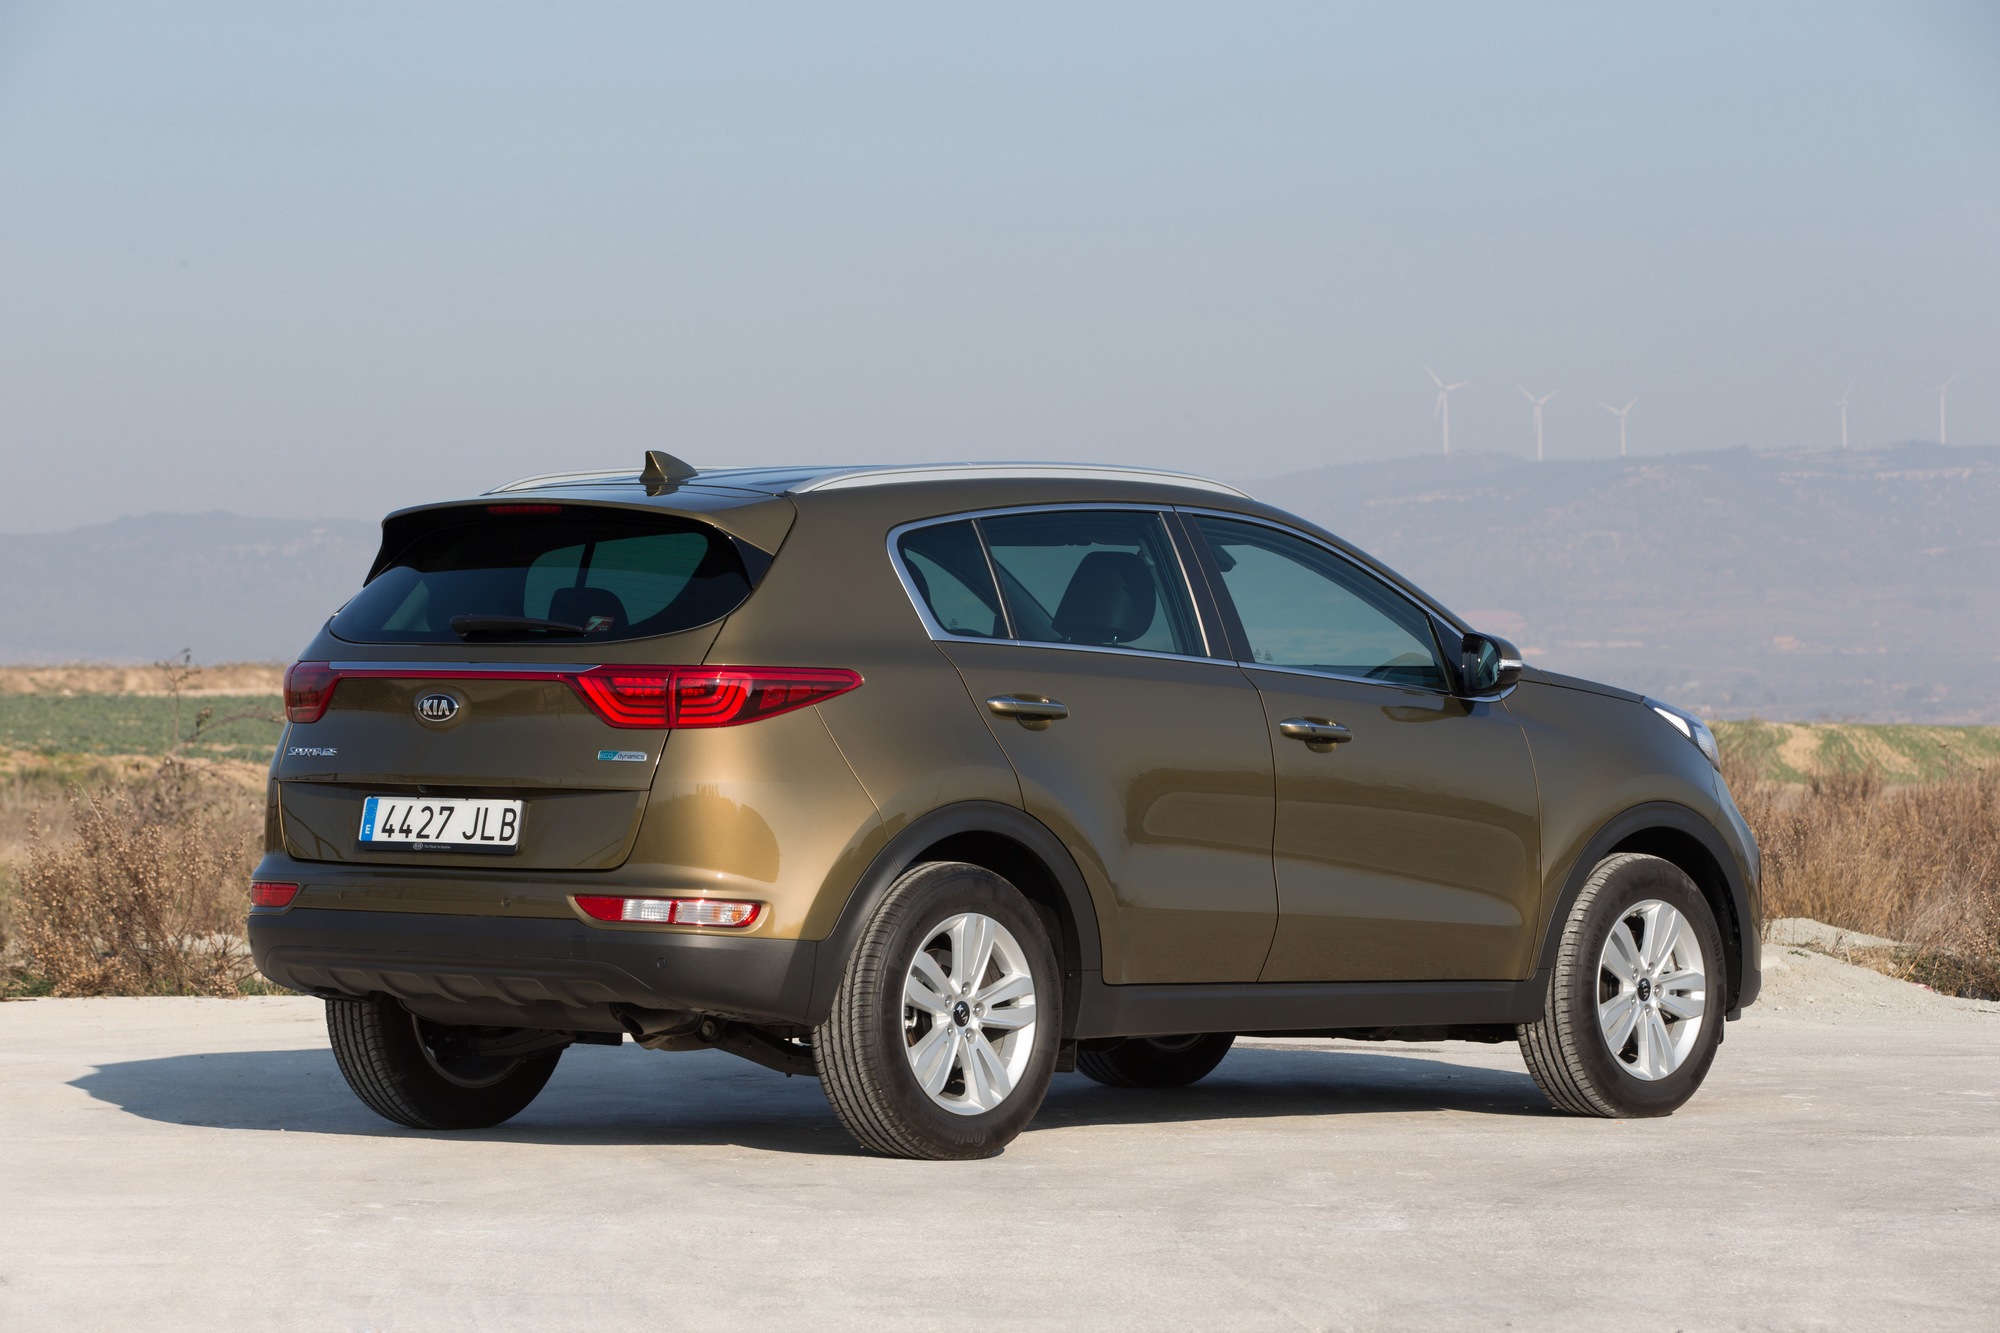 Kia Sportage: Comprehensive Guide to Technical Specifications